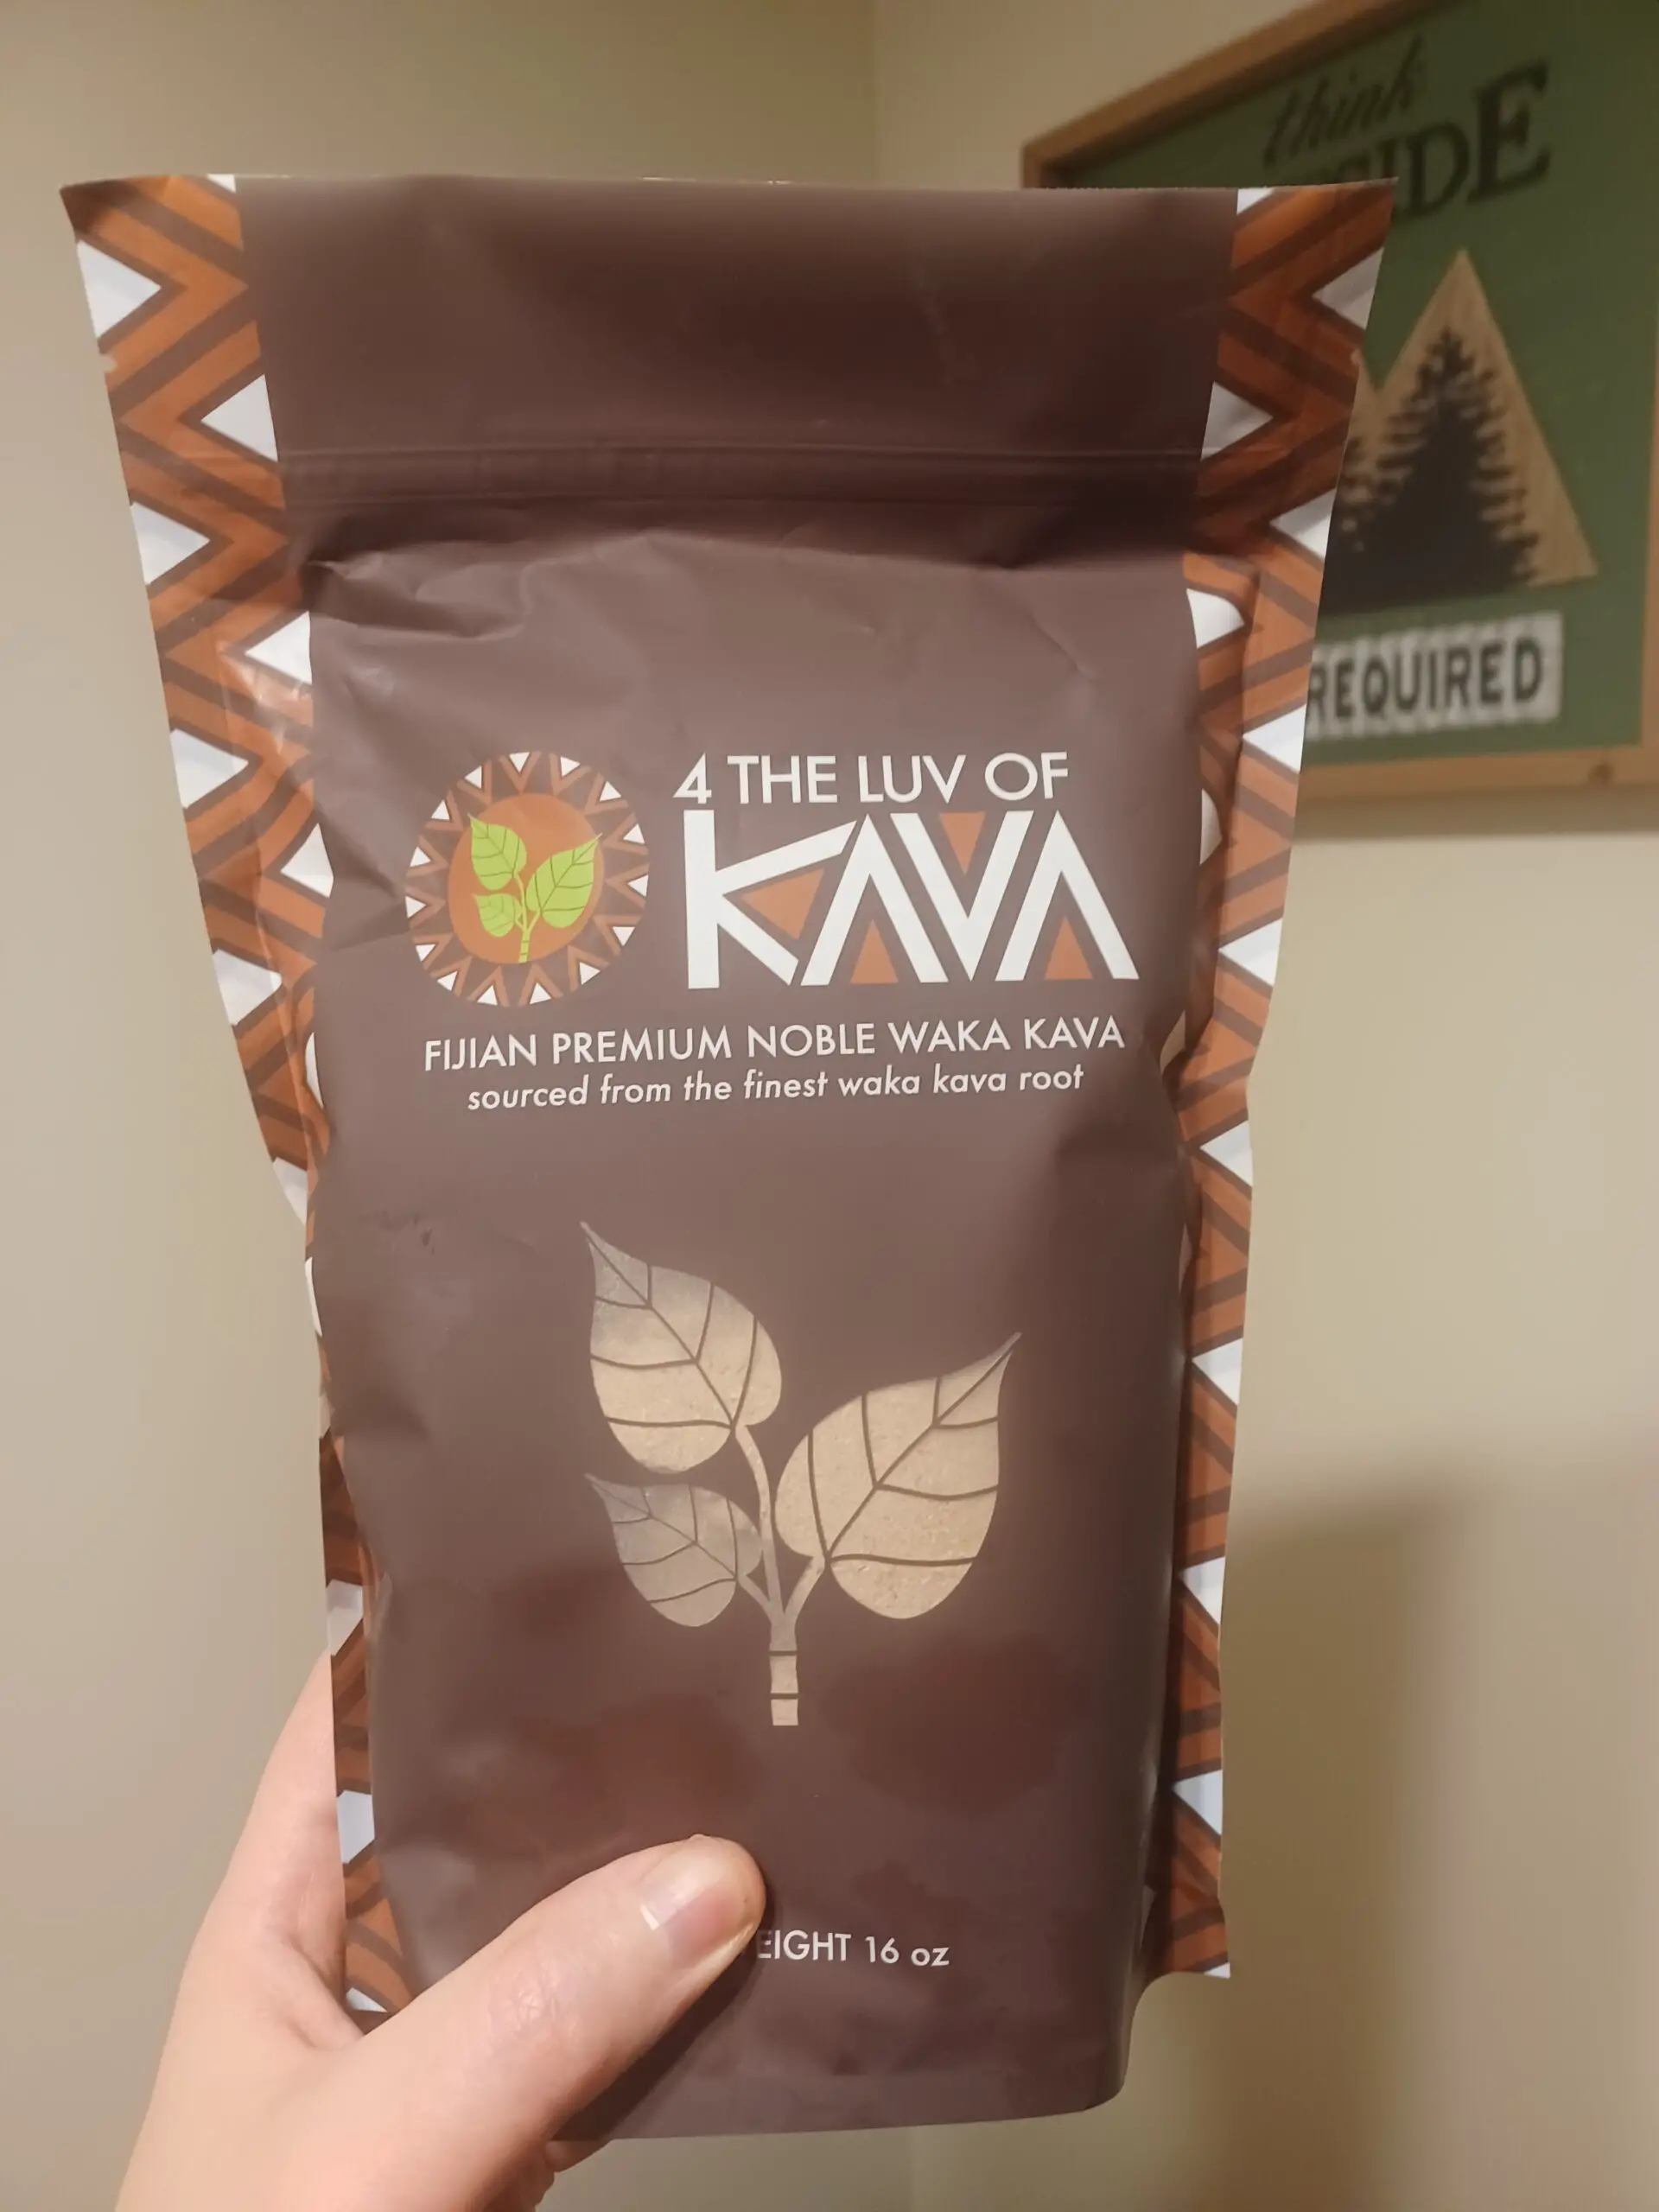 The product '4theLoveofKava' is an exceptional Kava Kava drink with health benefits for all lifestyles and types of drinkers. 